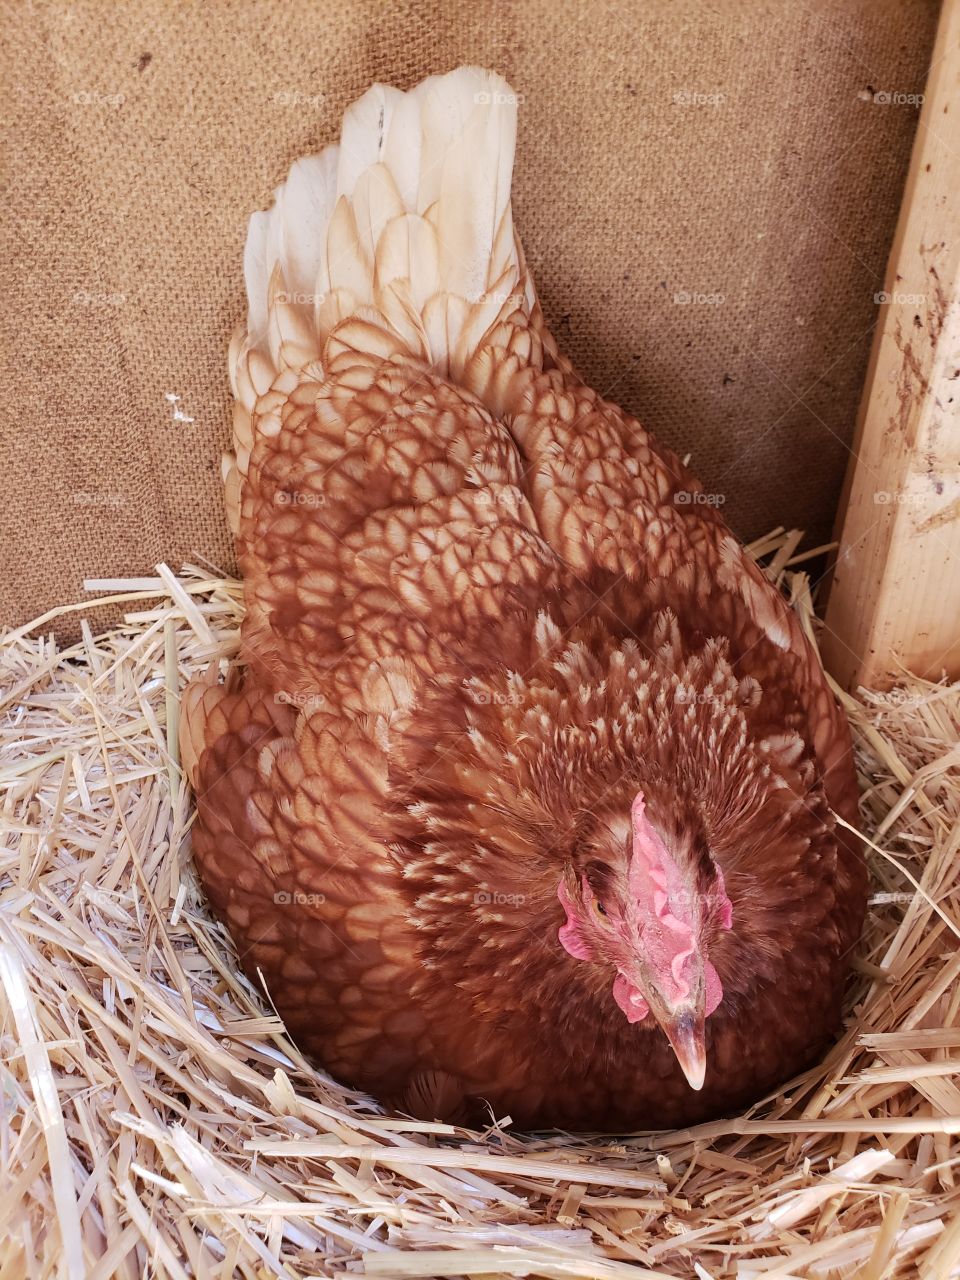 Broody Chicken but no fertilized eggs